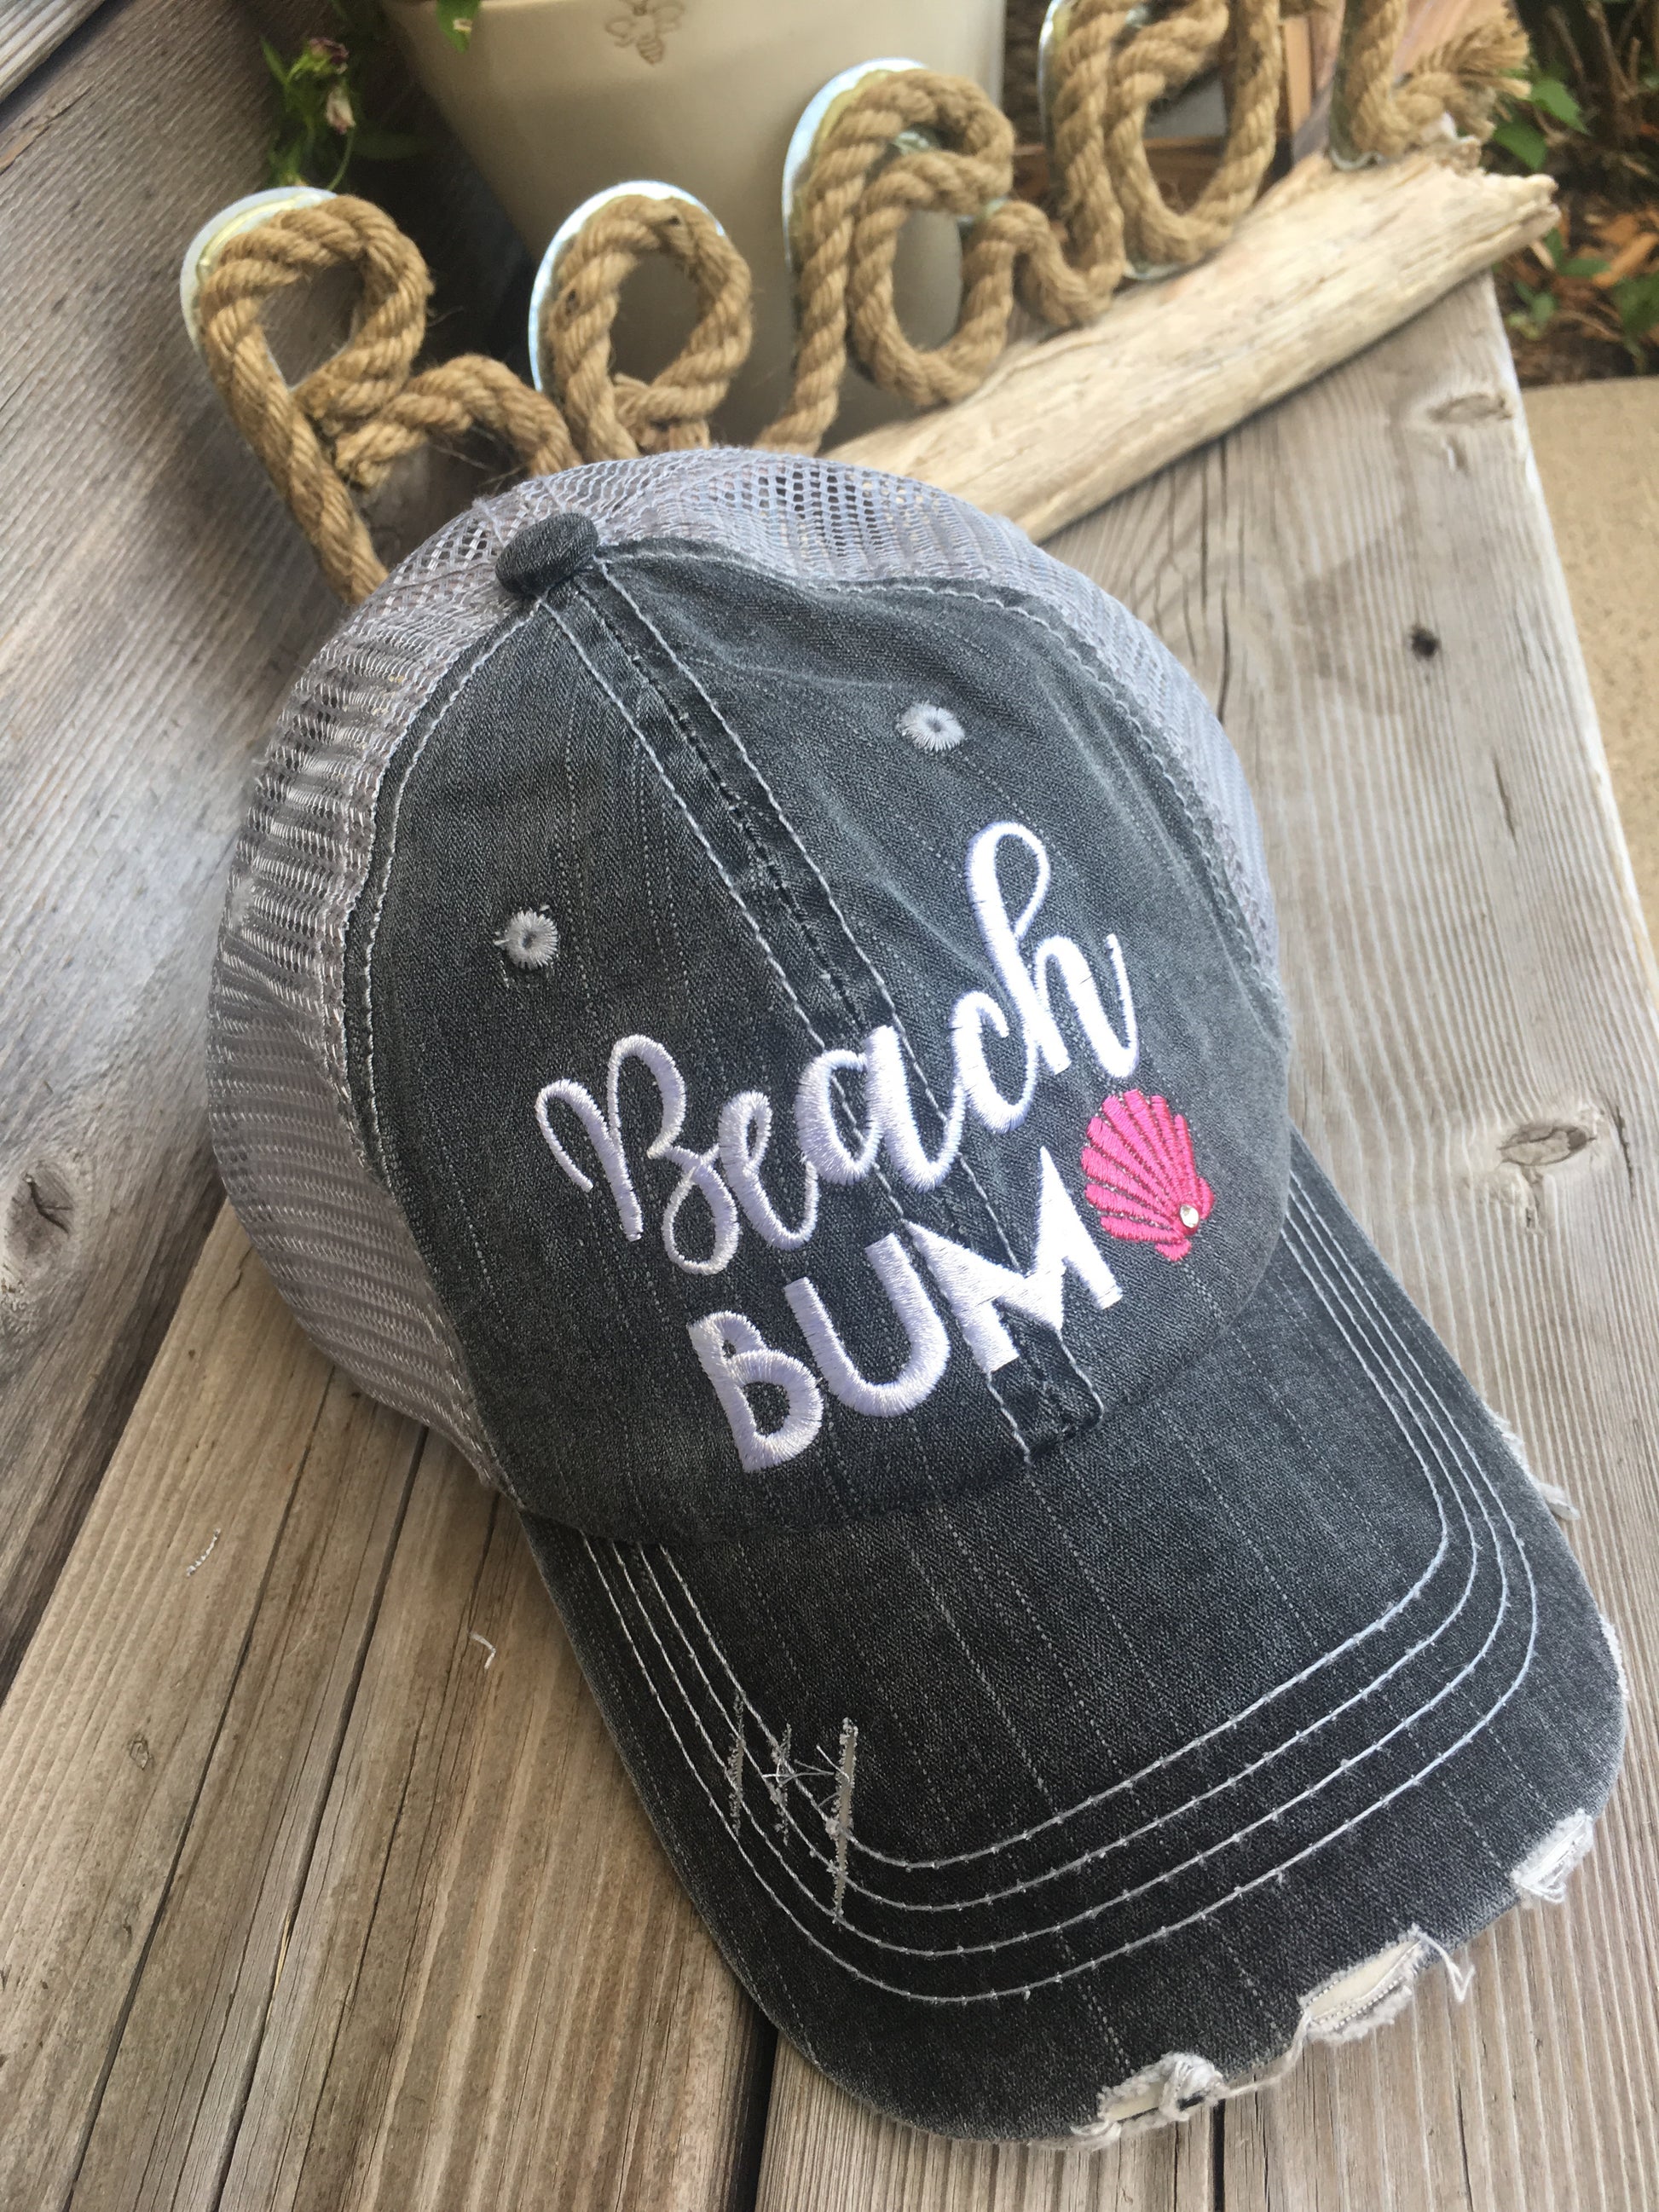 Lake and beach hats Lake bum Beach bum Embroidered unisex trucker caps Seashells Anchors - Stacy's Pink Martini Boutique